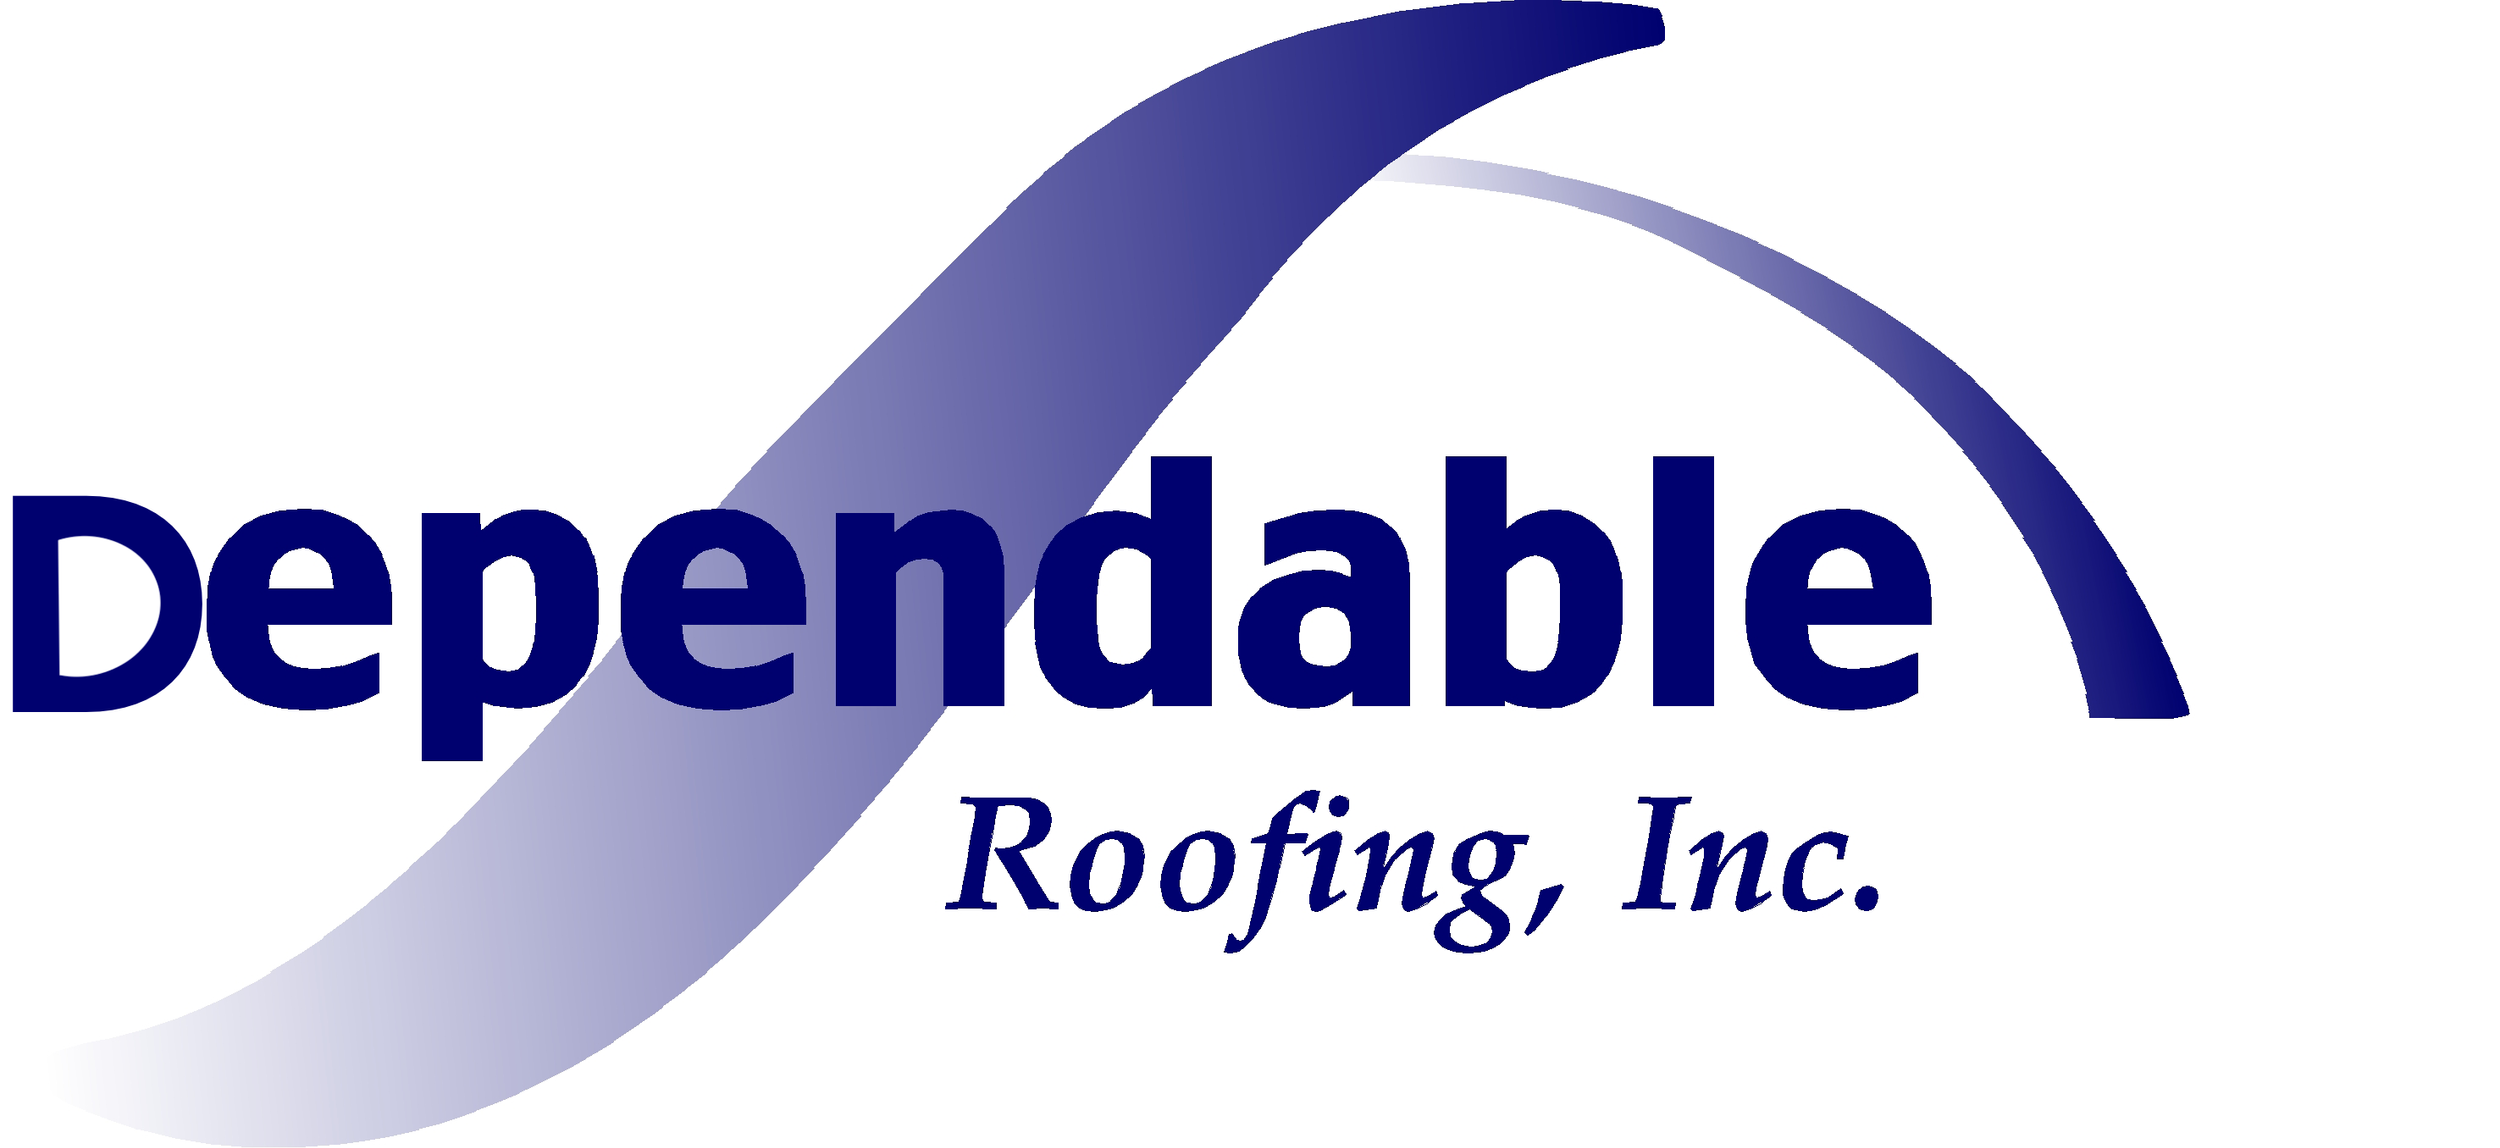 Dependable Roofing, Inc.